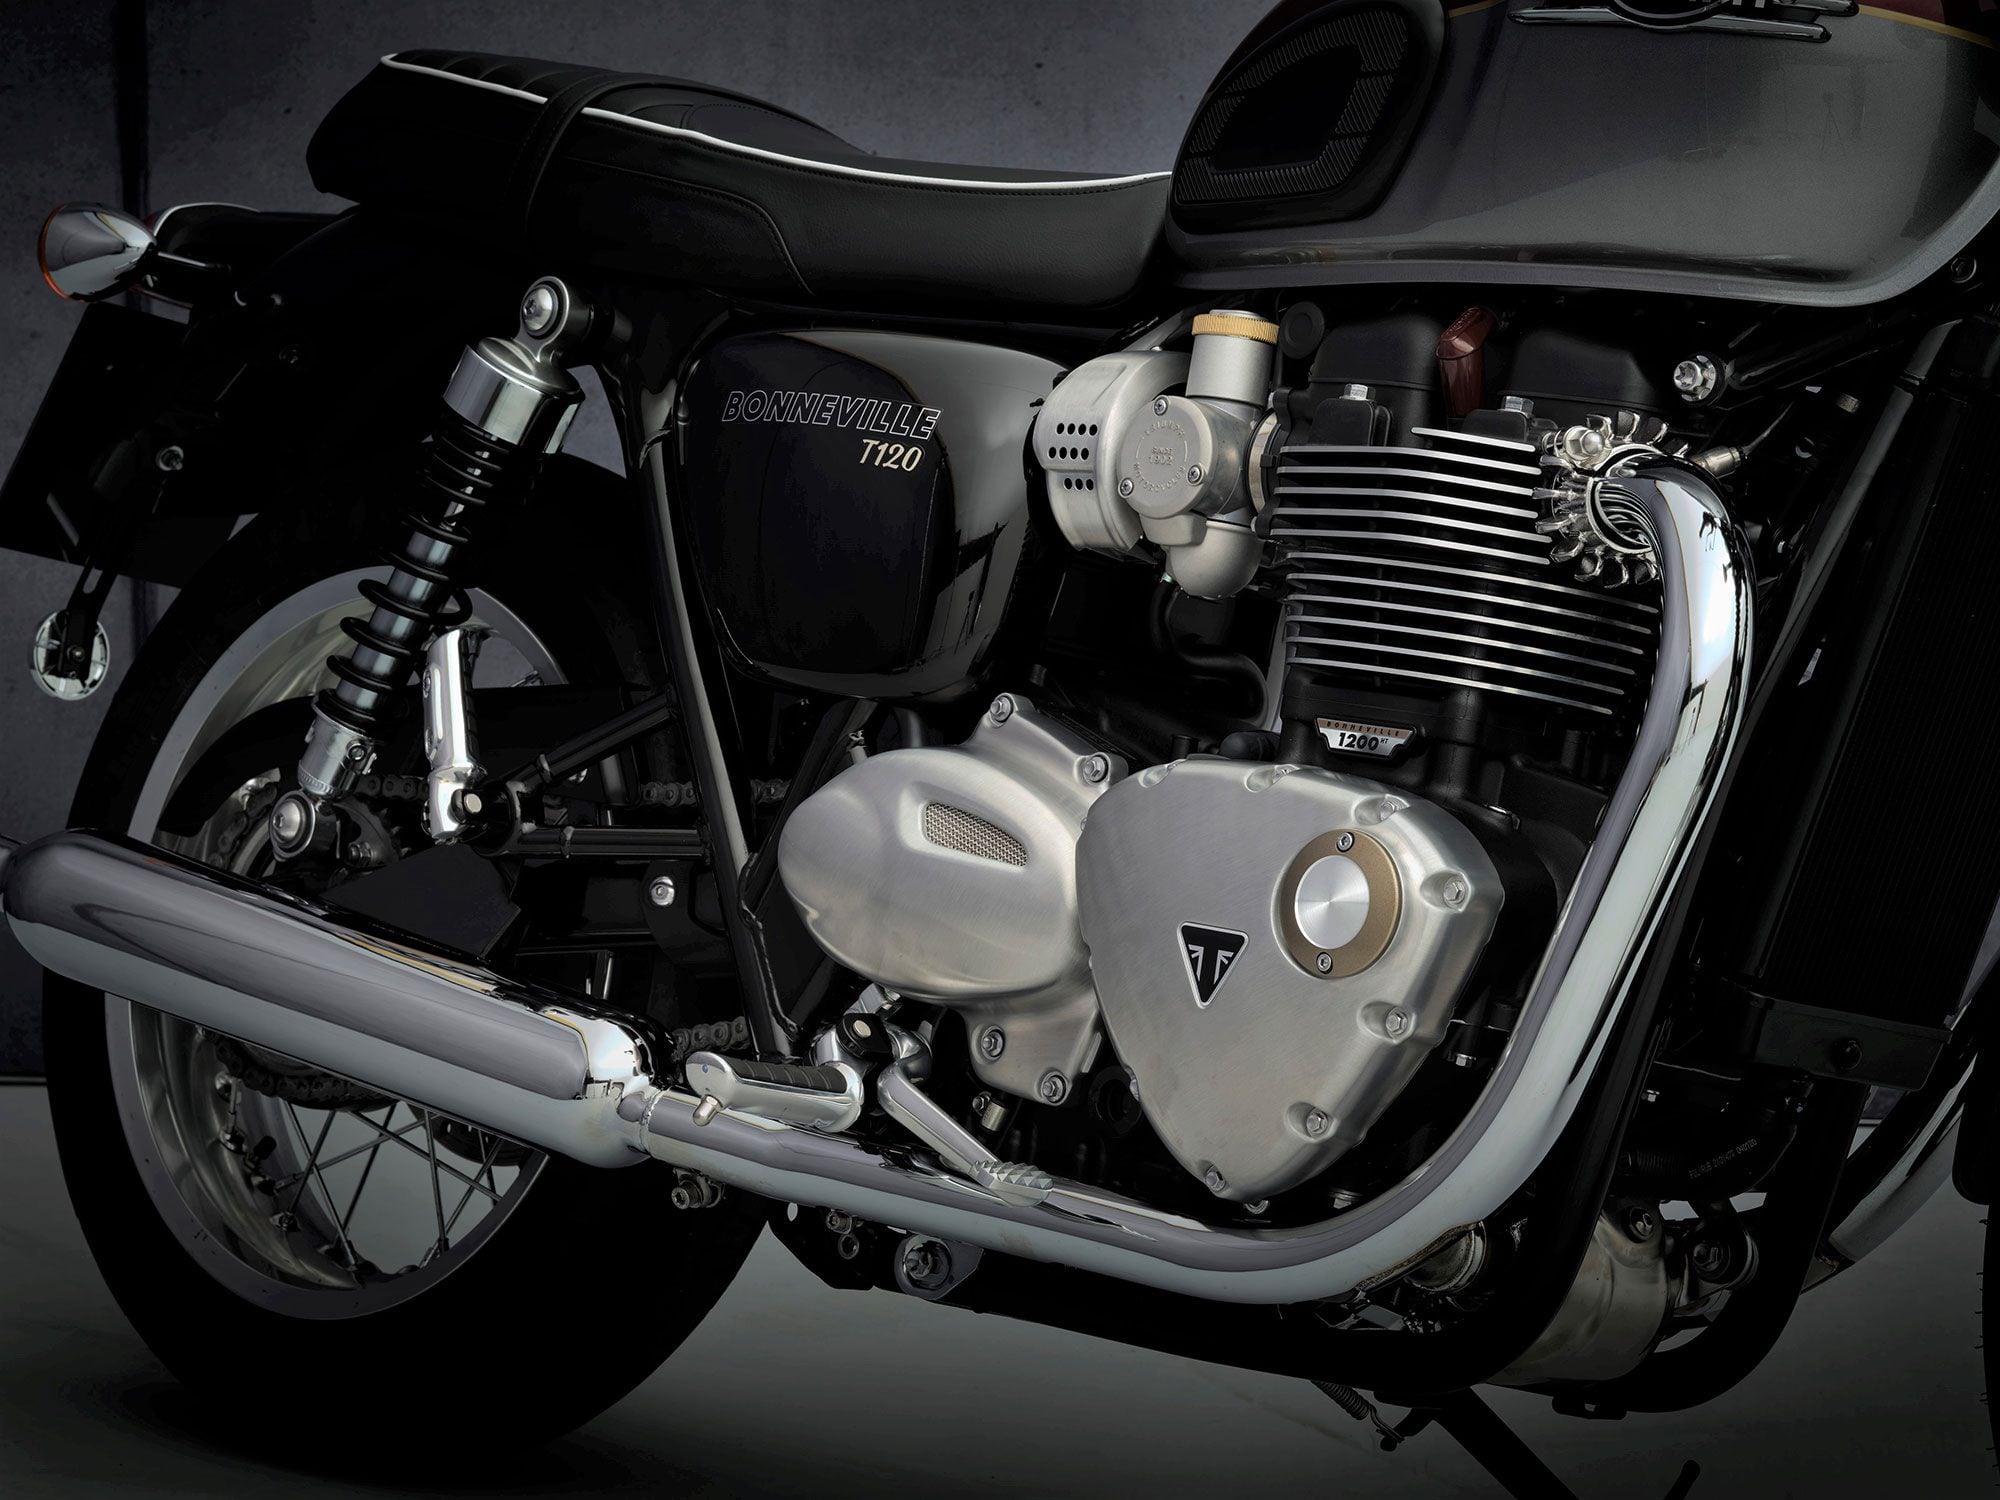 With a combination of changing cam profiles and revised porting, Triumph was able to meet Euro 5 emissions requirements.